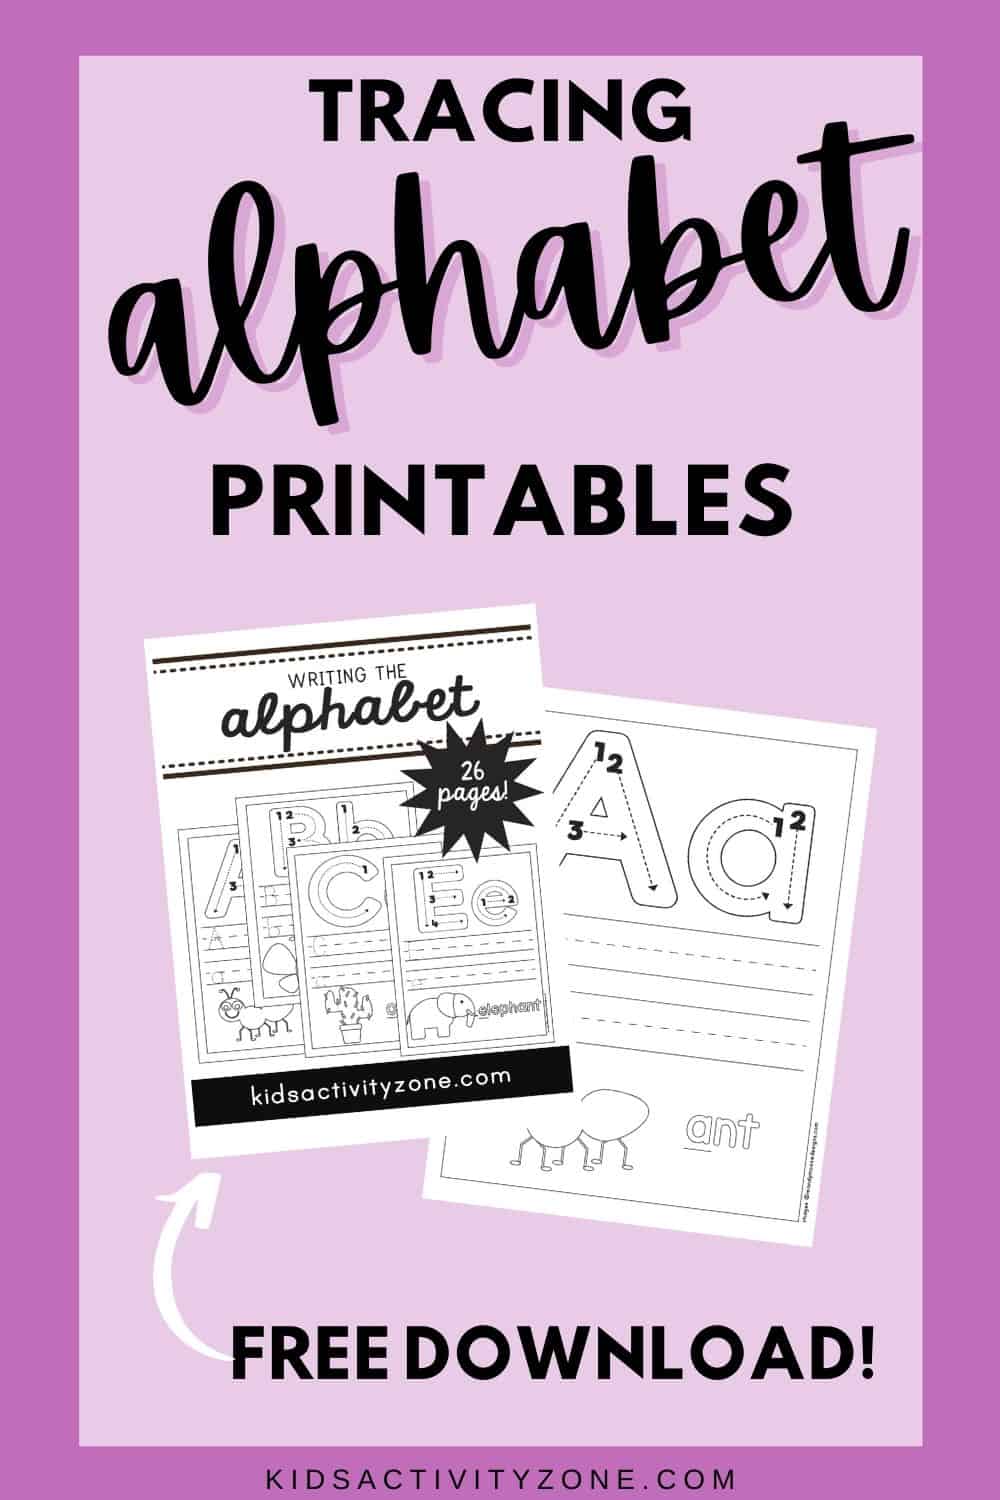 This free download of Alphabet Tracing Worksheets are perfect for your young learner! Tracing the letters will help them identify letters, great for fine motor skills and letter recognition.